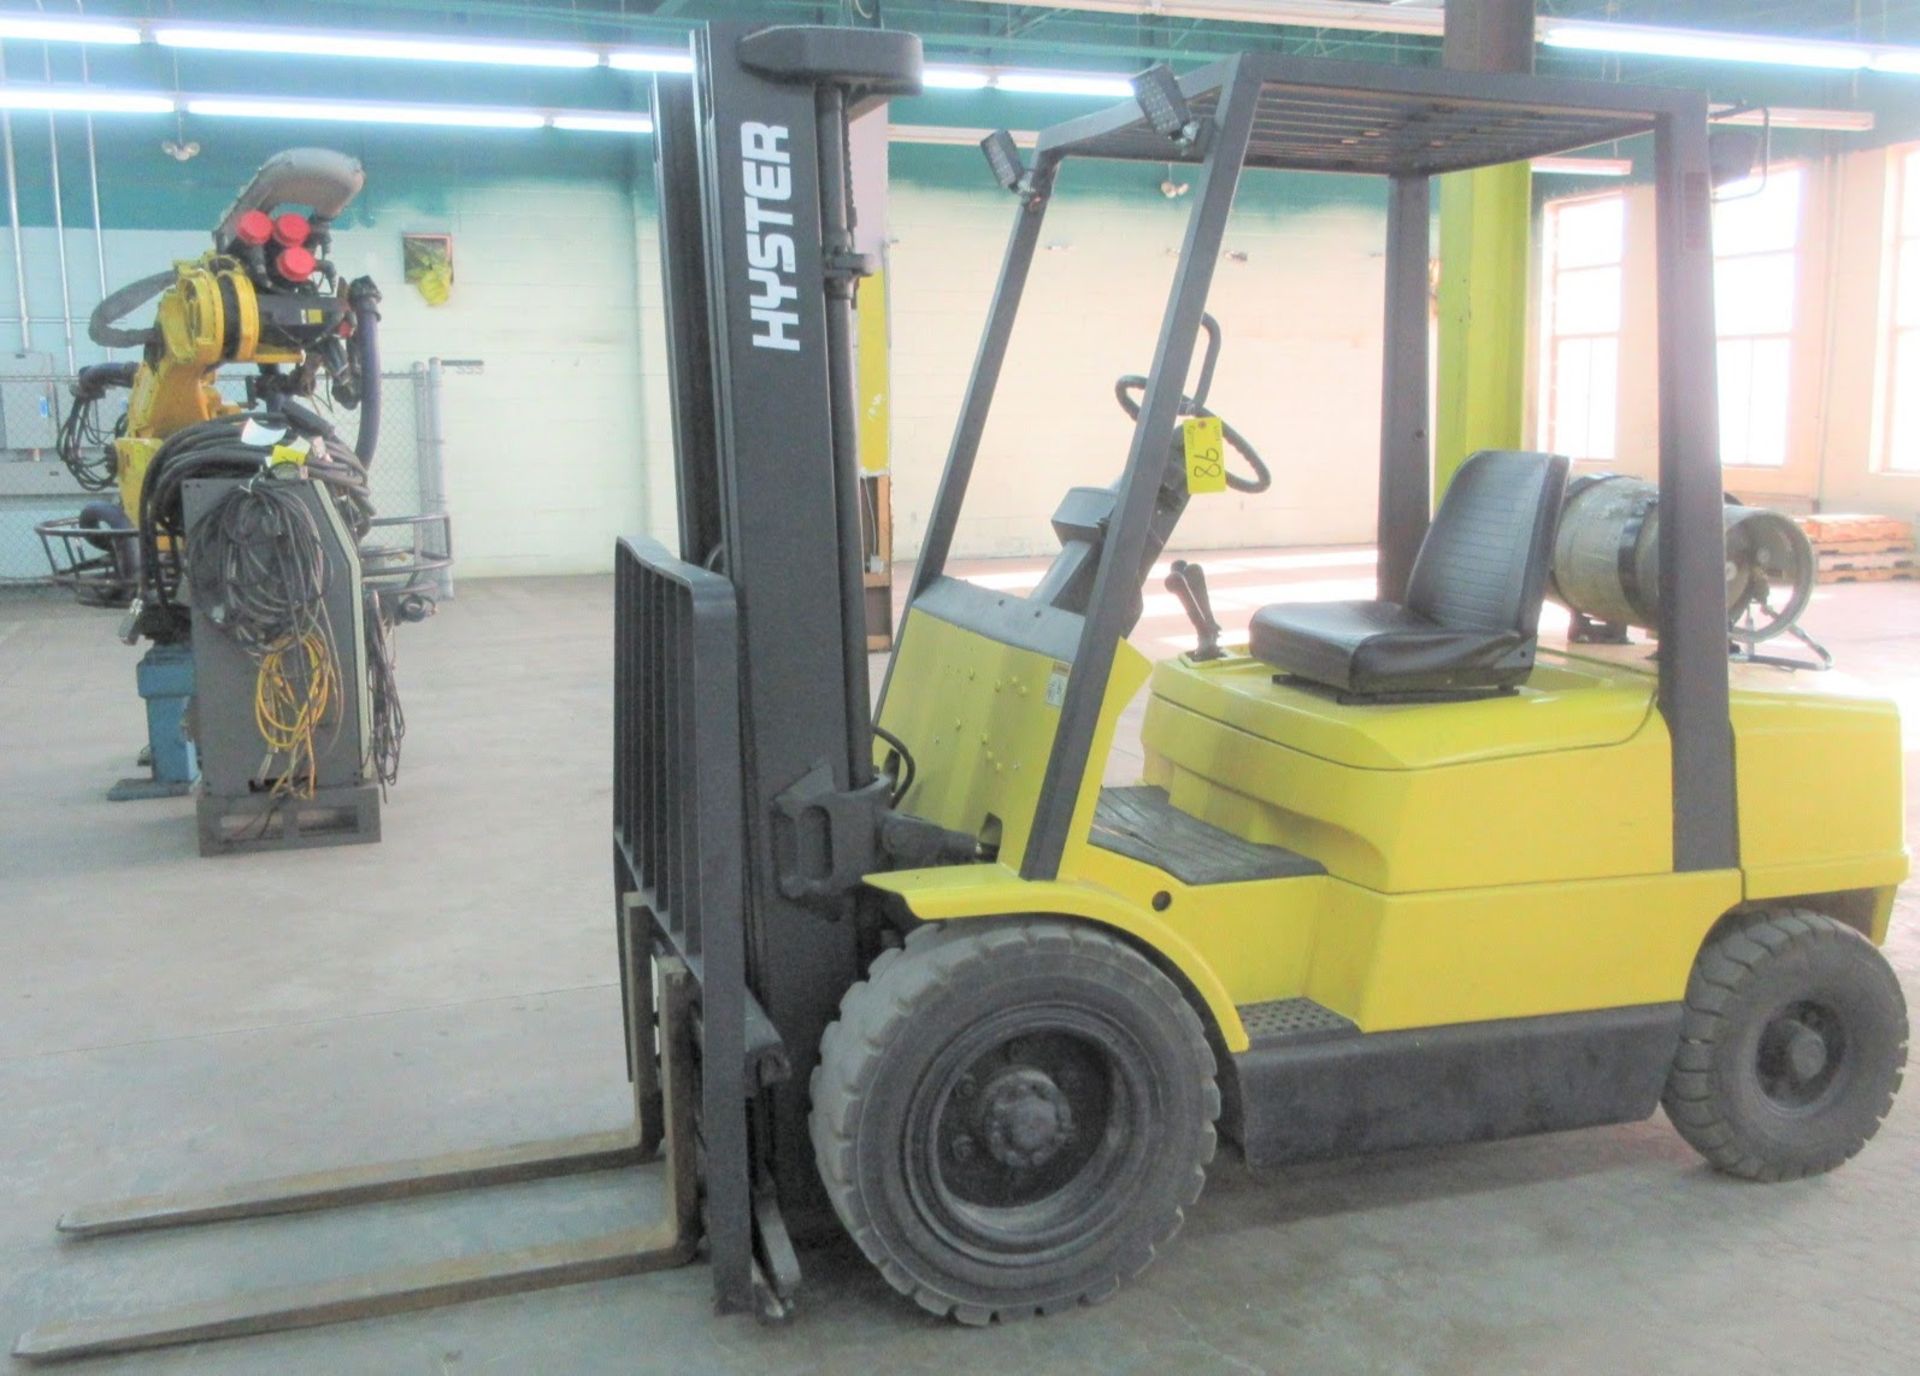 HYSTER H50XM OUTDOOR PROPANE FORKLIFT, 4,850LB CAP., 189" MAX LIFT, 40" FORKS, 3-STAGE MAST, SIDE